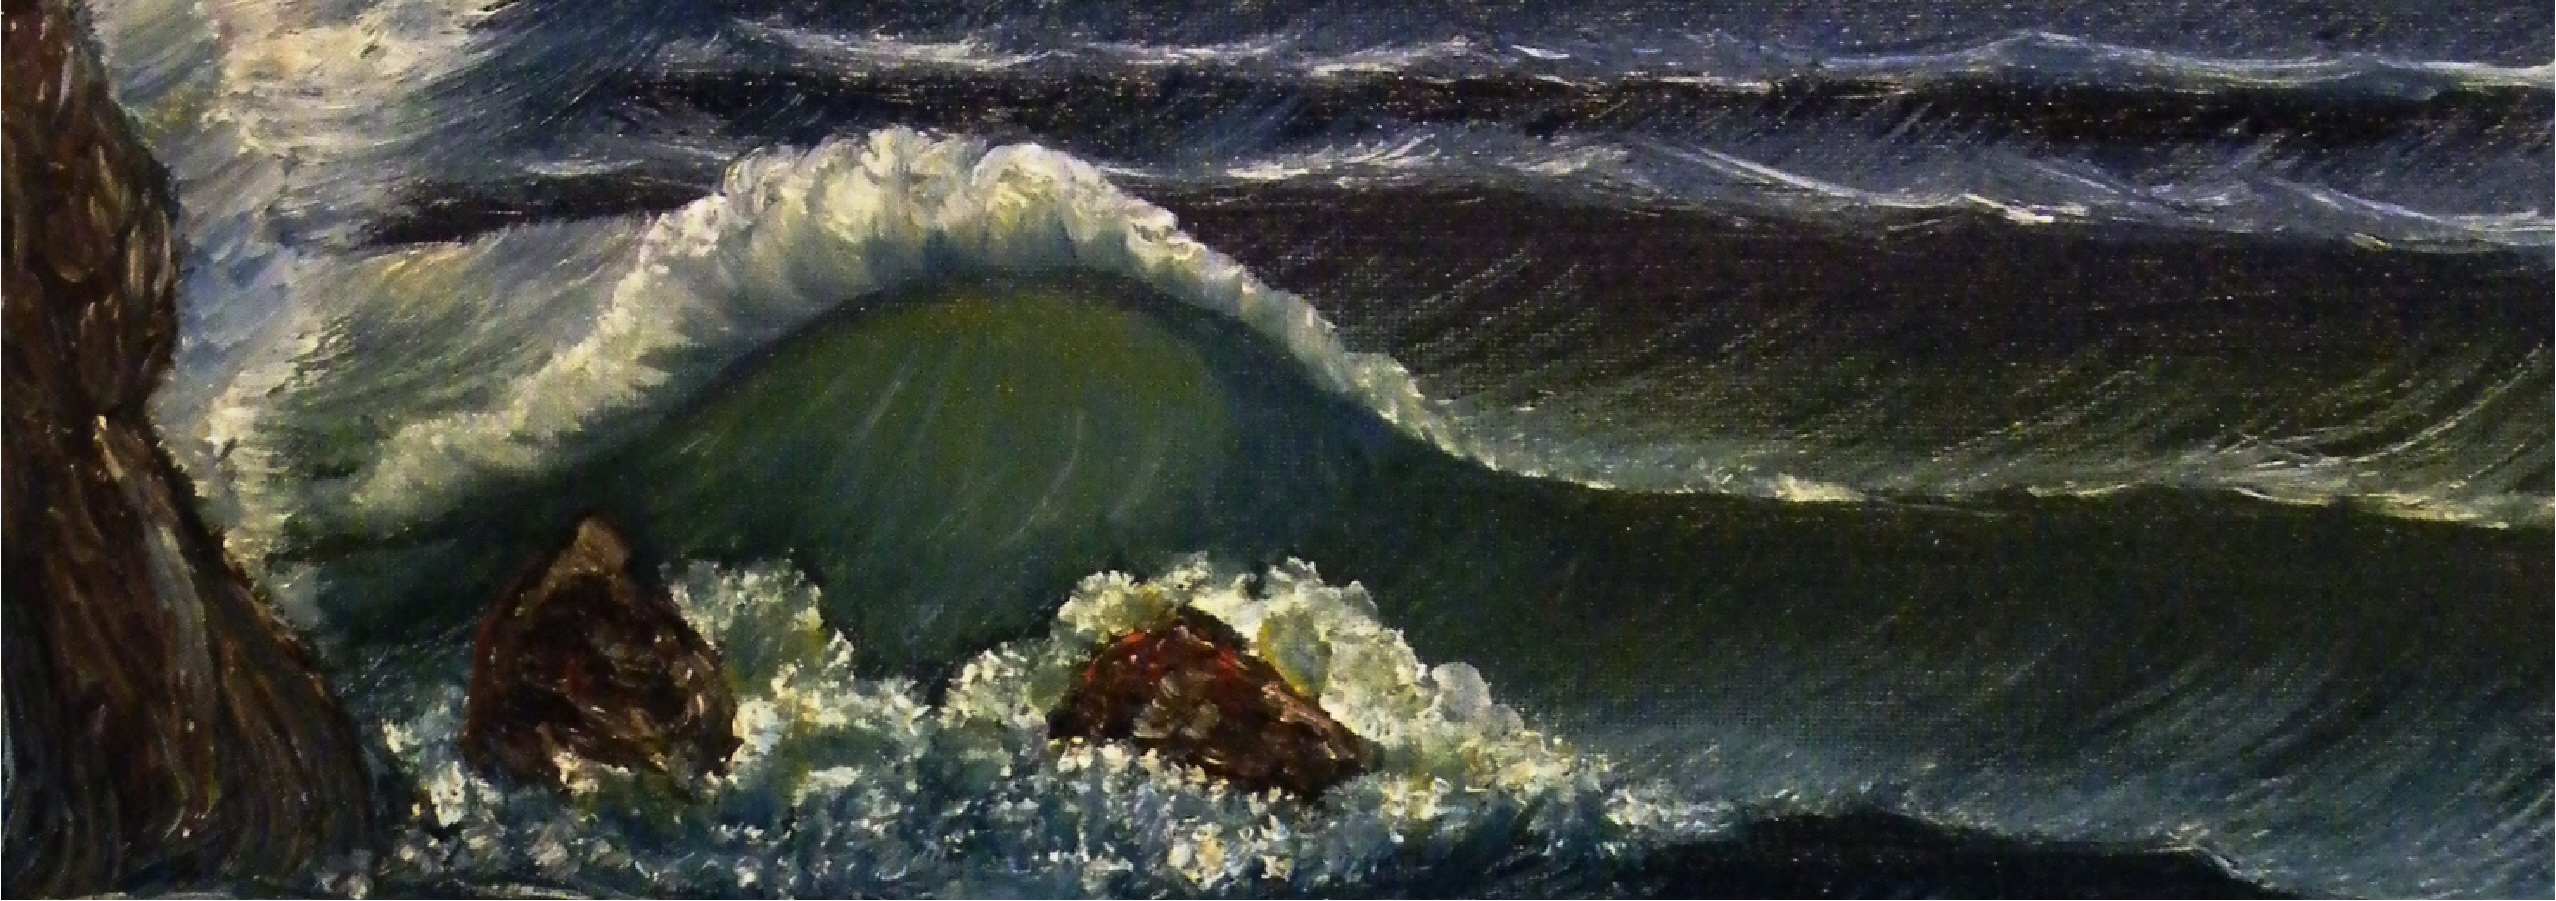 Sound Of Ocean Seascape Oil Painting By The GYPSY